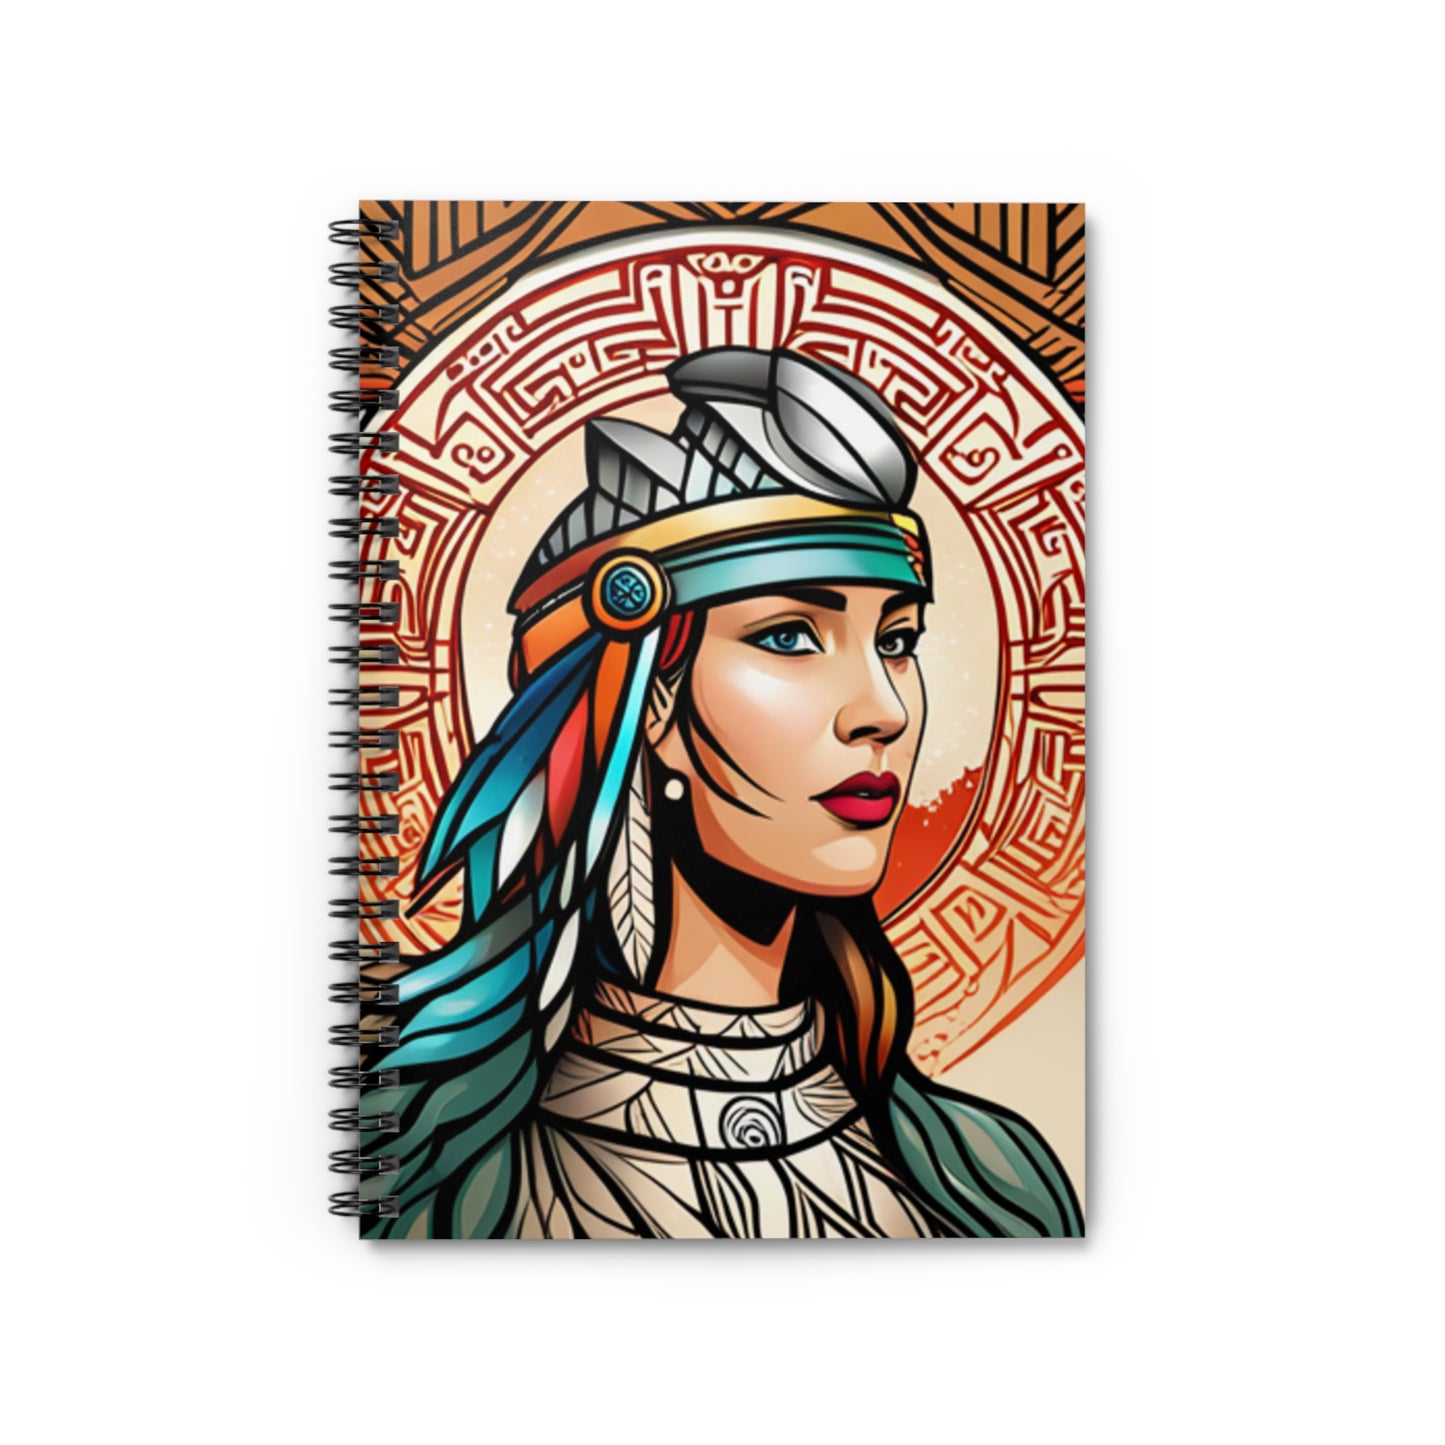 Ancient Mexican Woman Warrior Spiral Notebook - Ruled Line